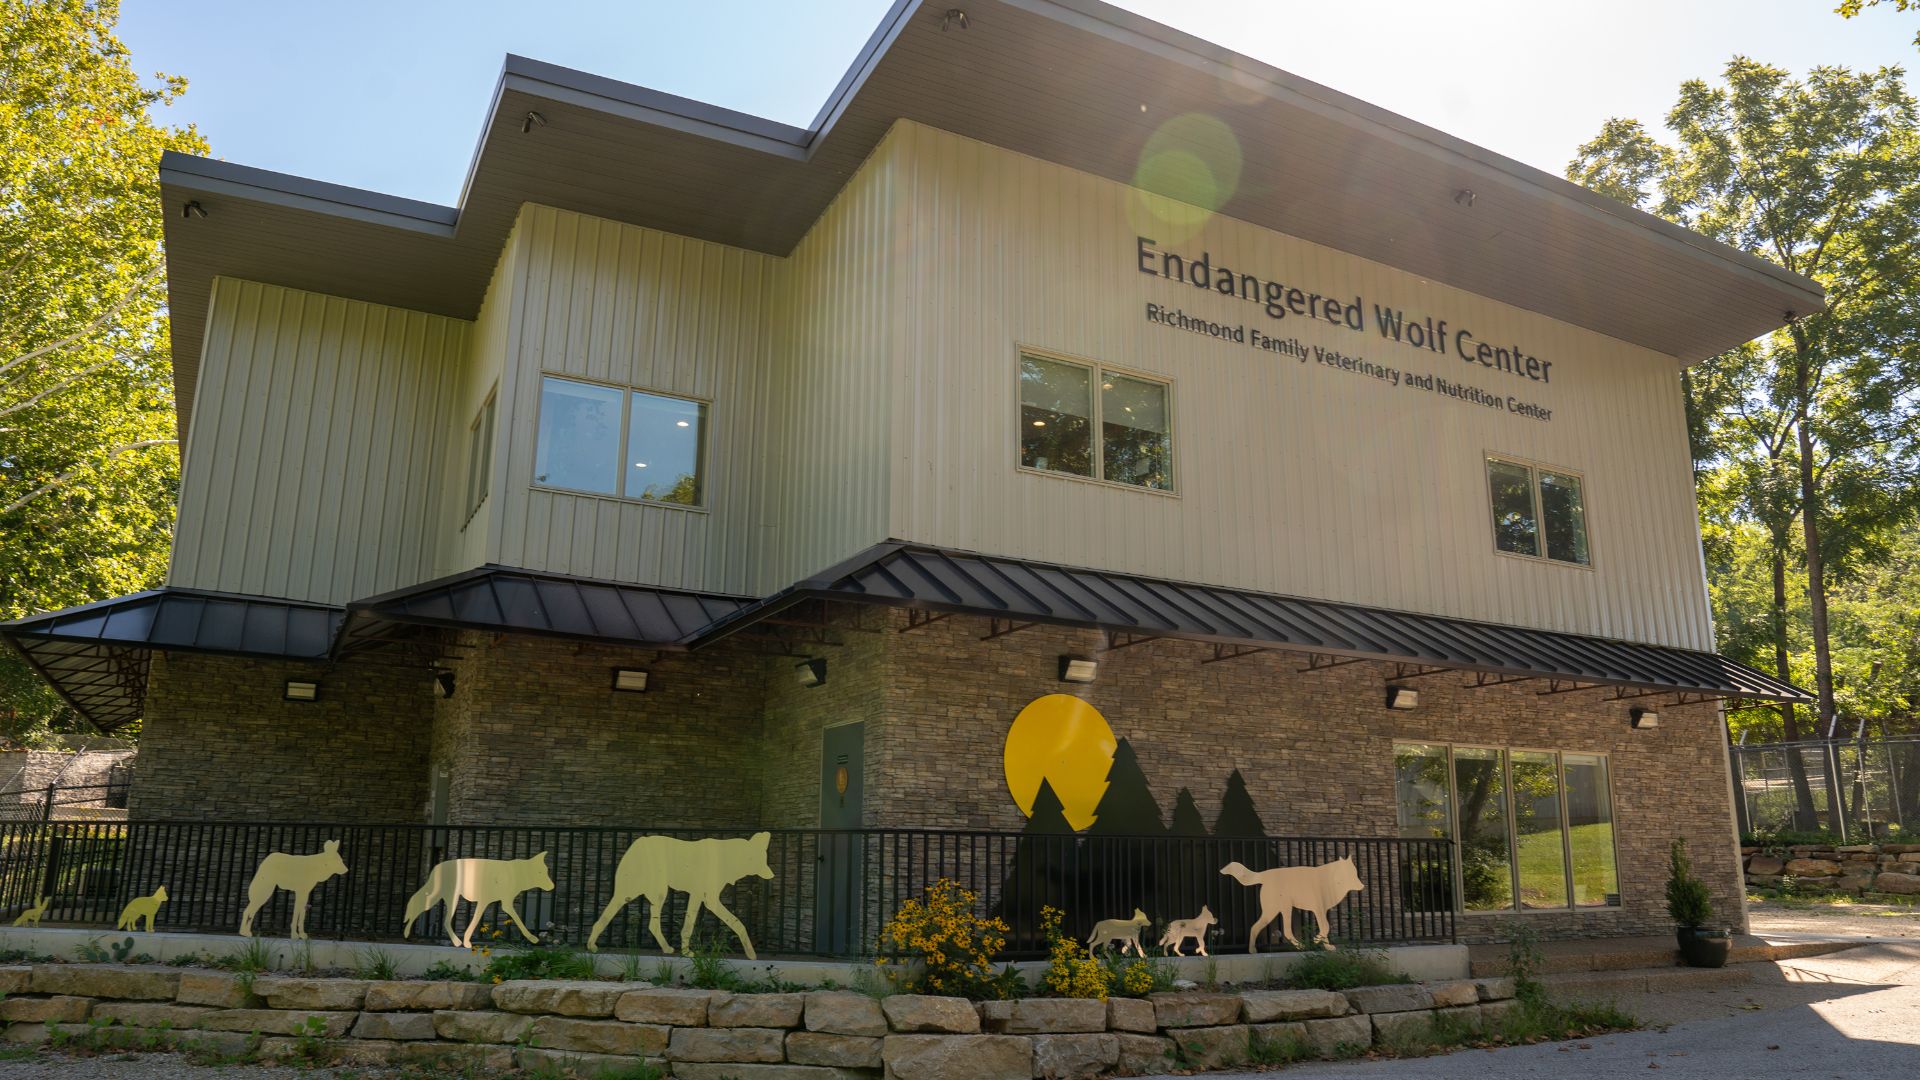 The Richmond Family Veterinary and Nutrition Center is a recent addition to the Endangered Wolf Center.